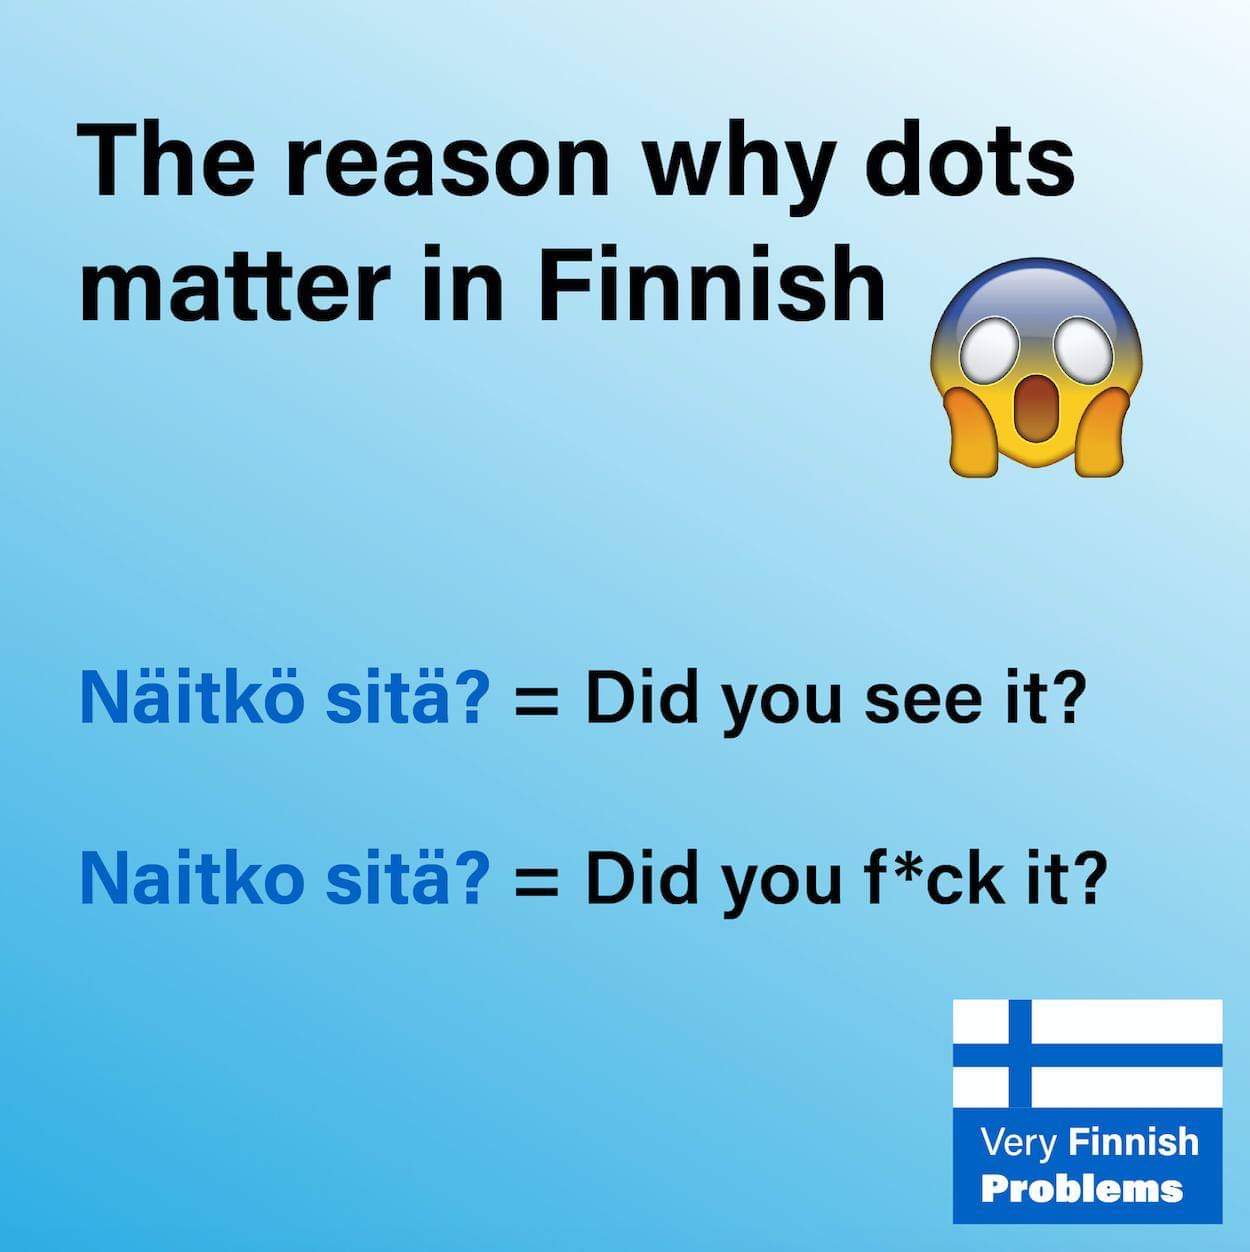 dots matter in finnish - The reason why dots matter in Finnish Nitk sit? Did you see it? Naitko sit? Did you fck it? Very Finnish Problems